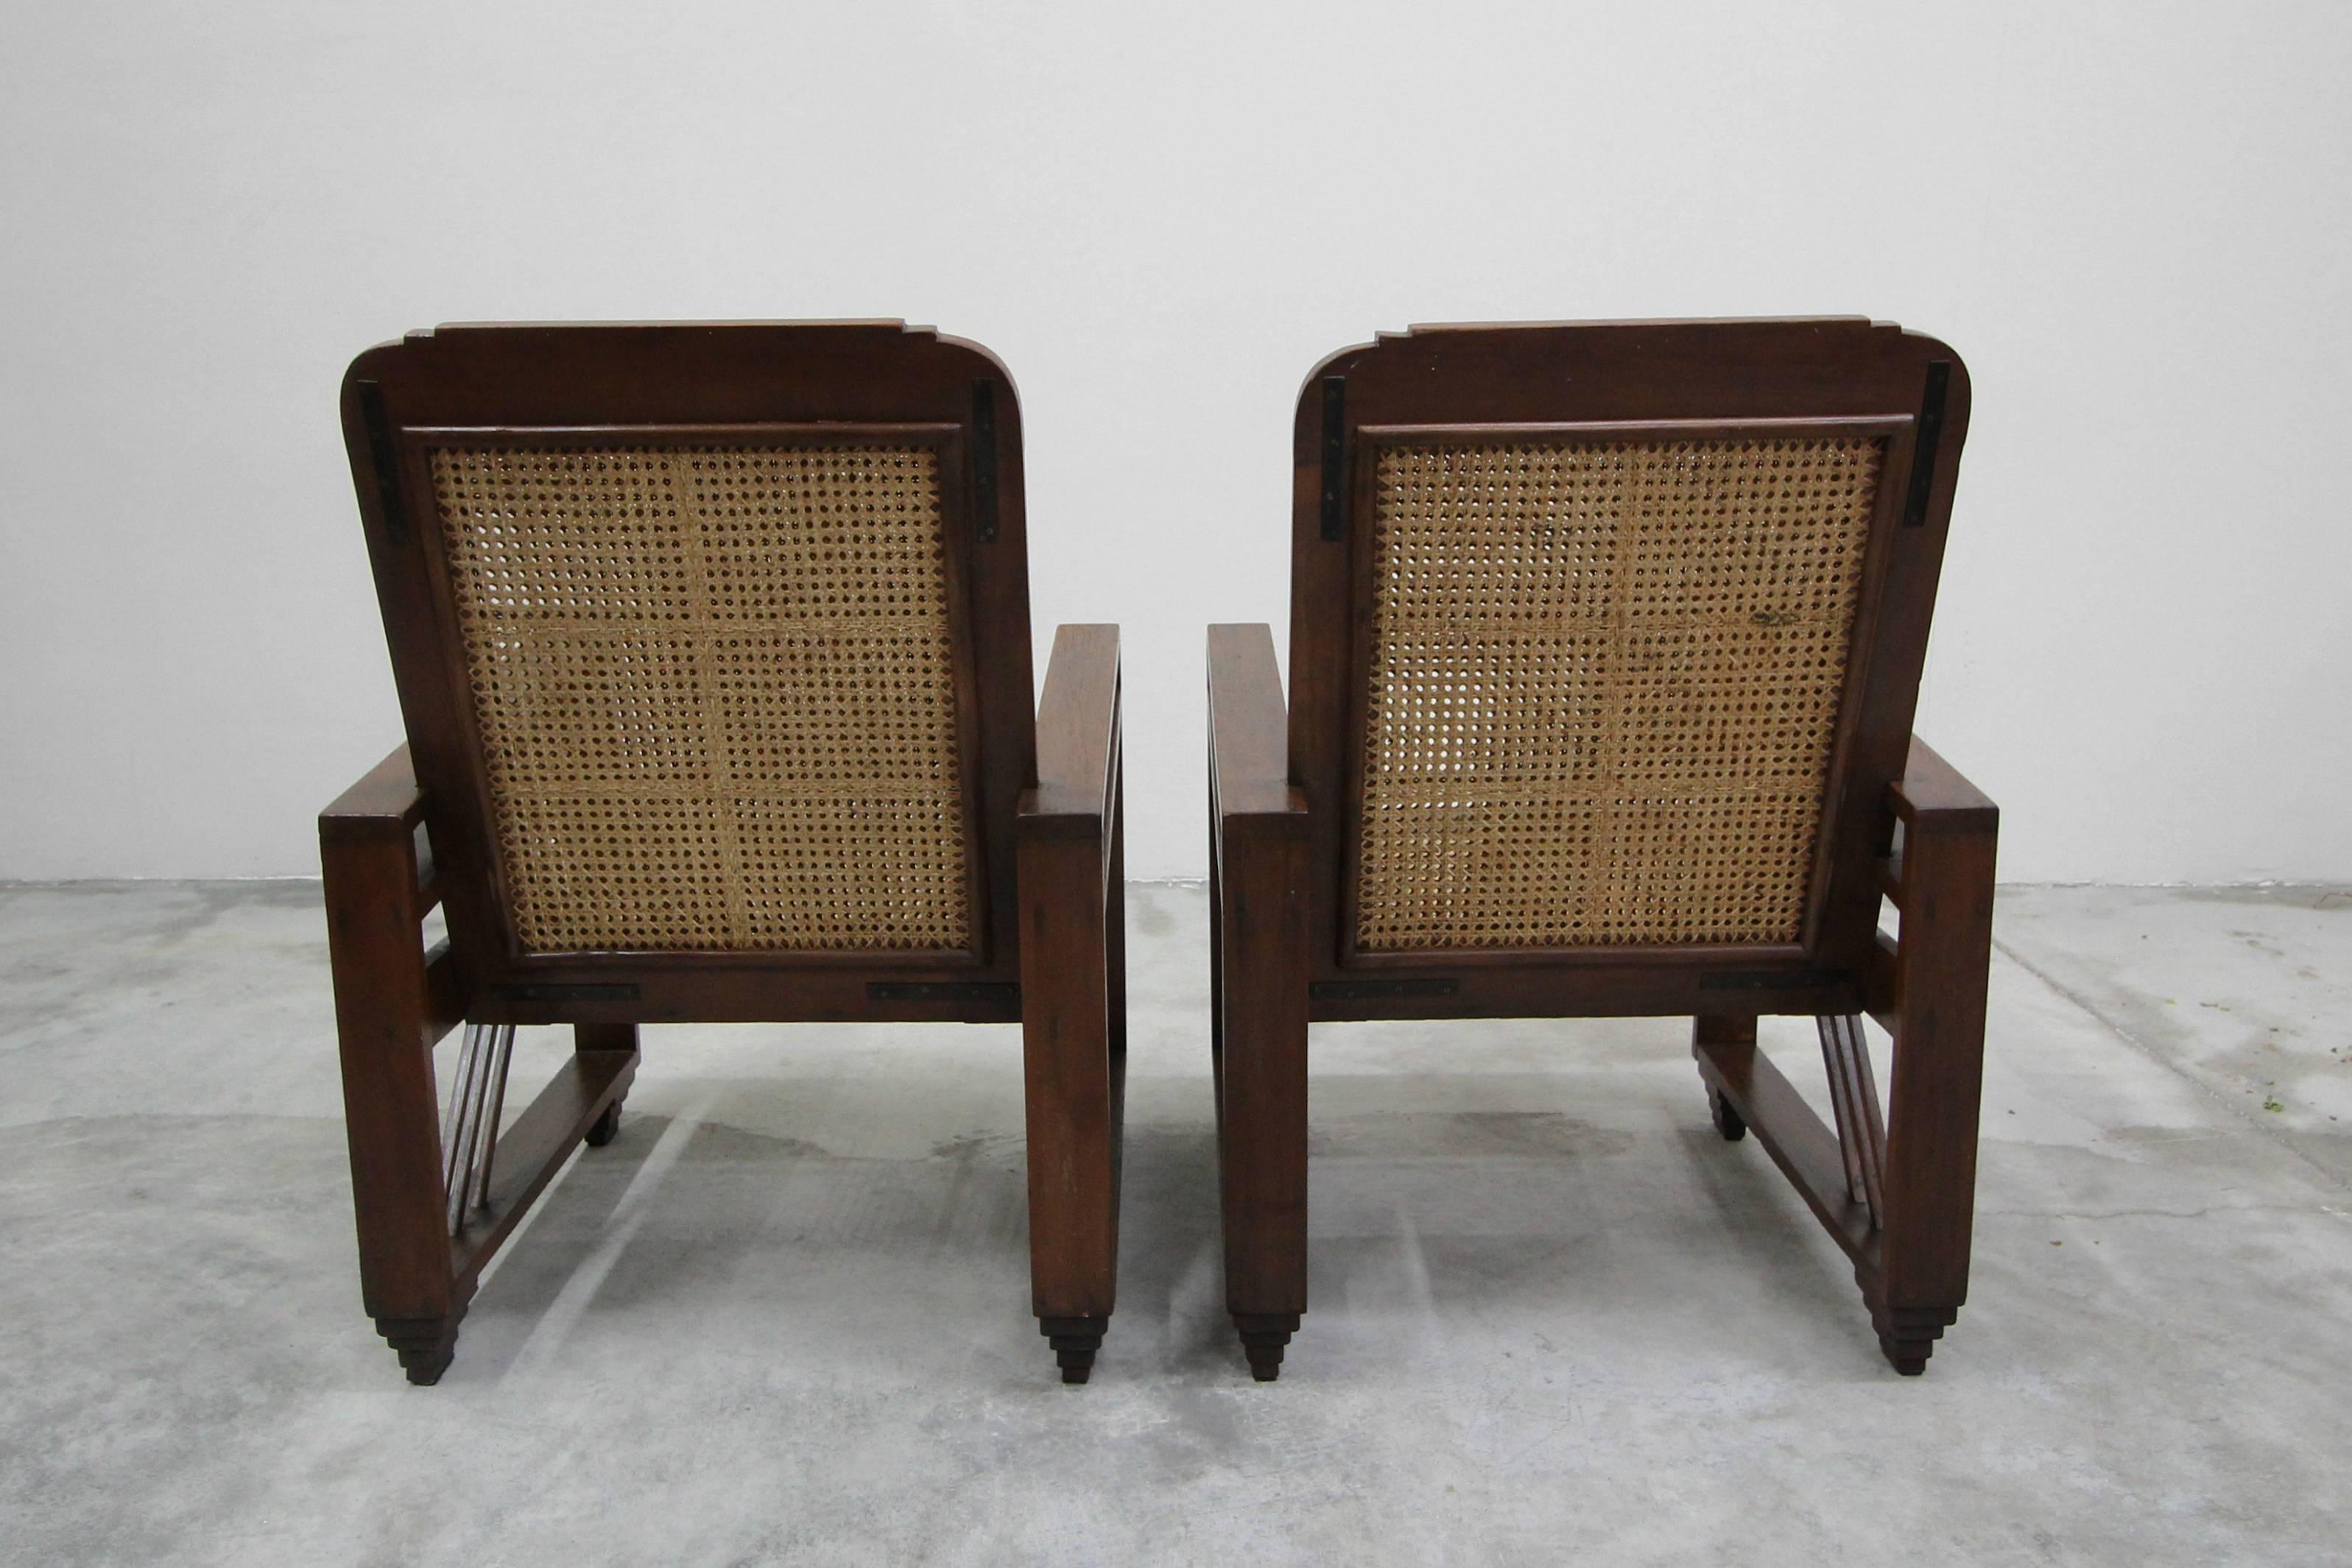 Pair of Antique French Art Deco Solid Wood Lounge Chairs with Cane Backs & Seats 3